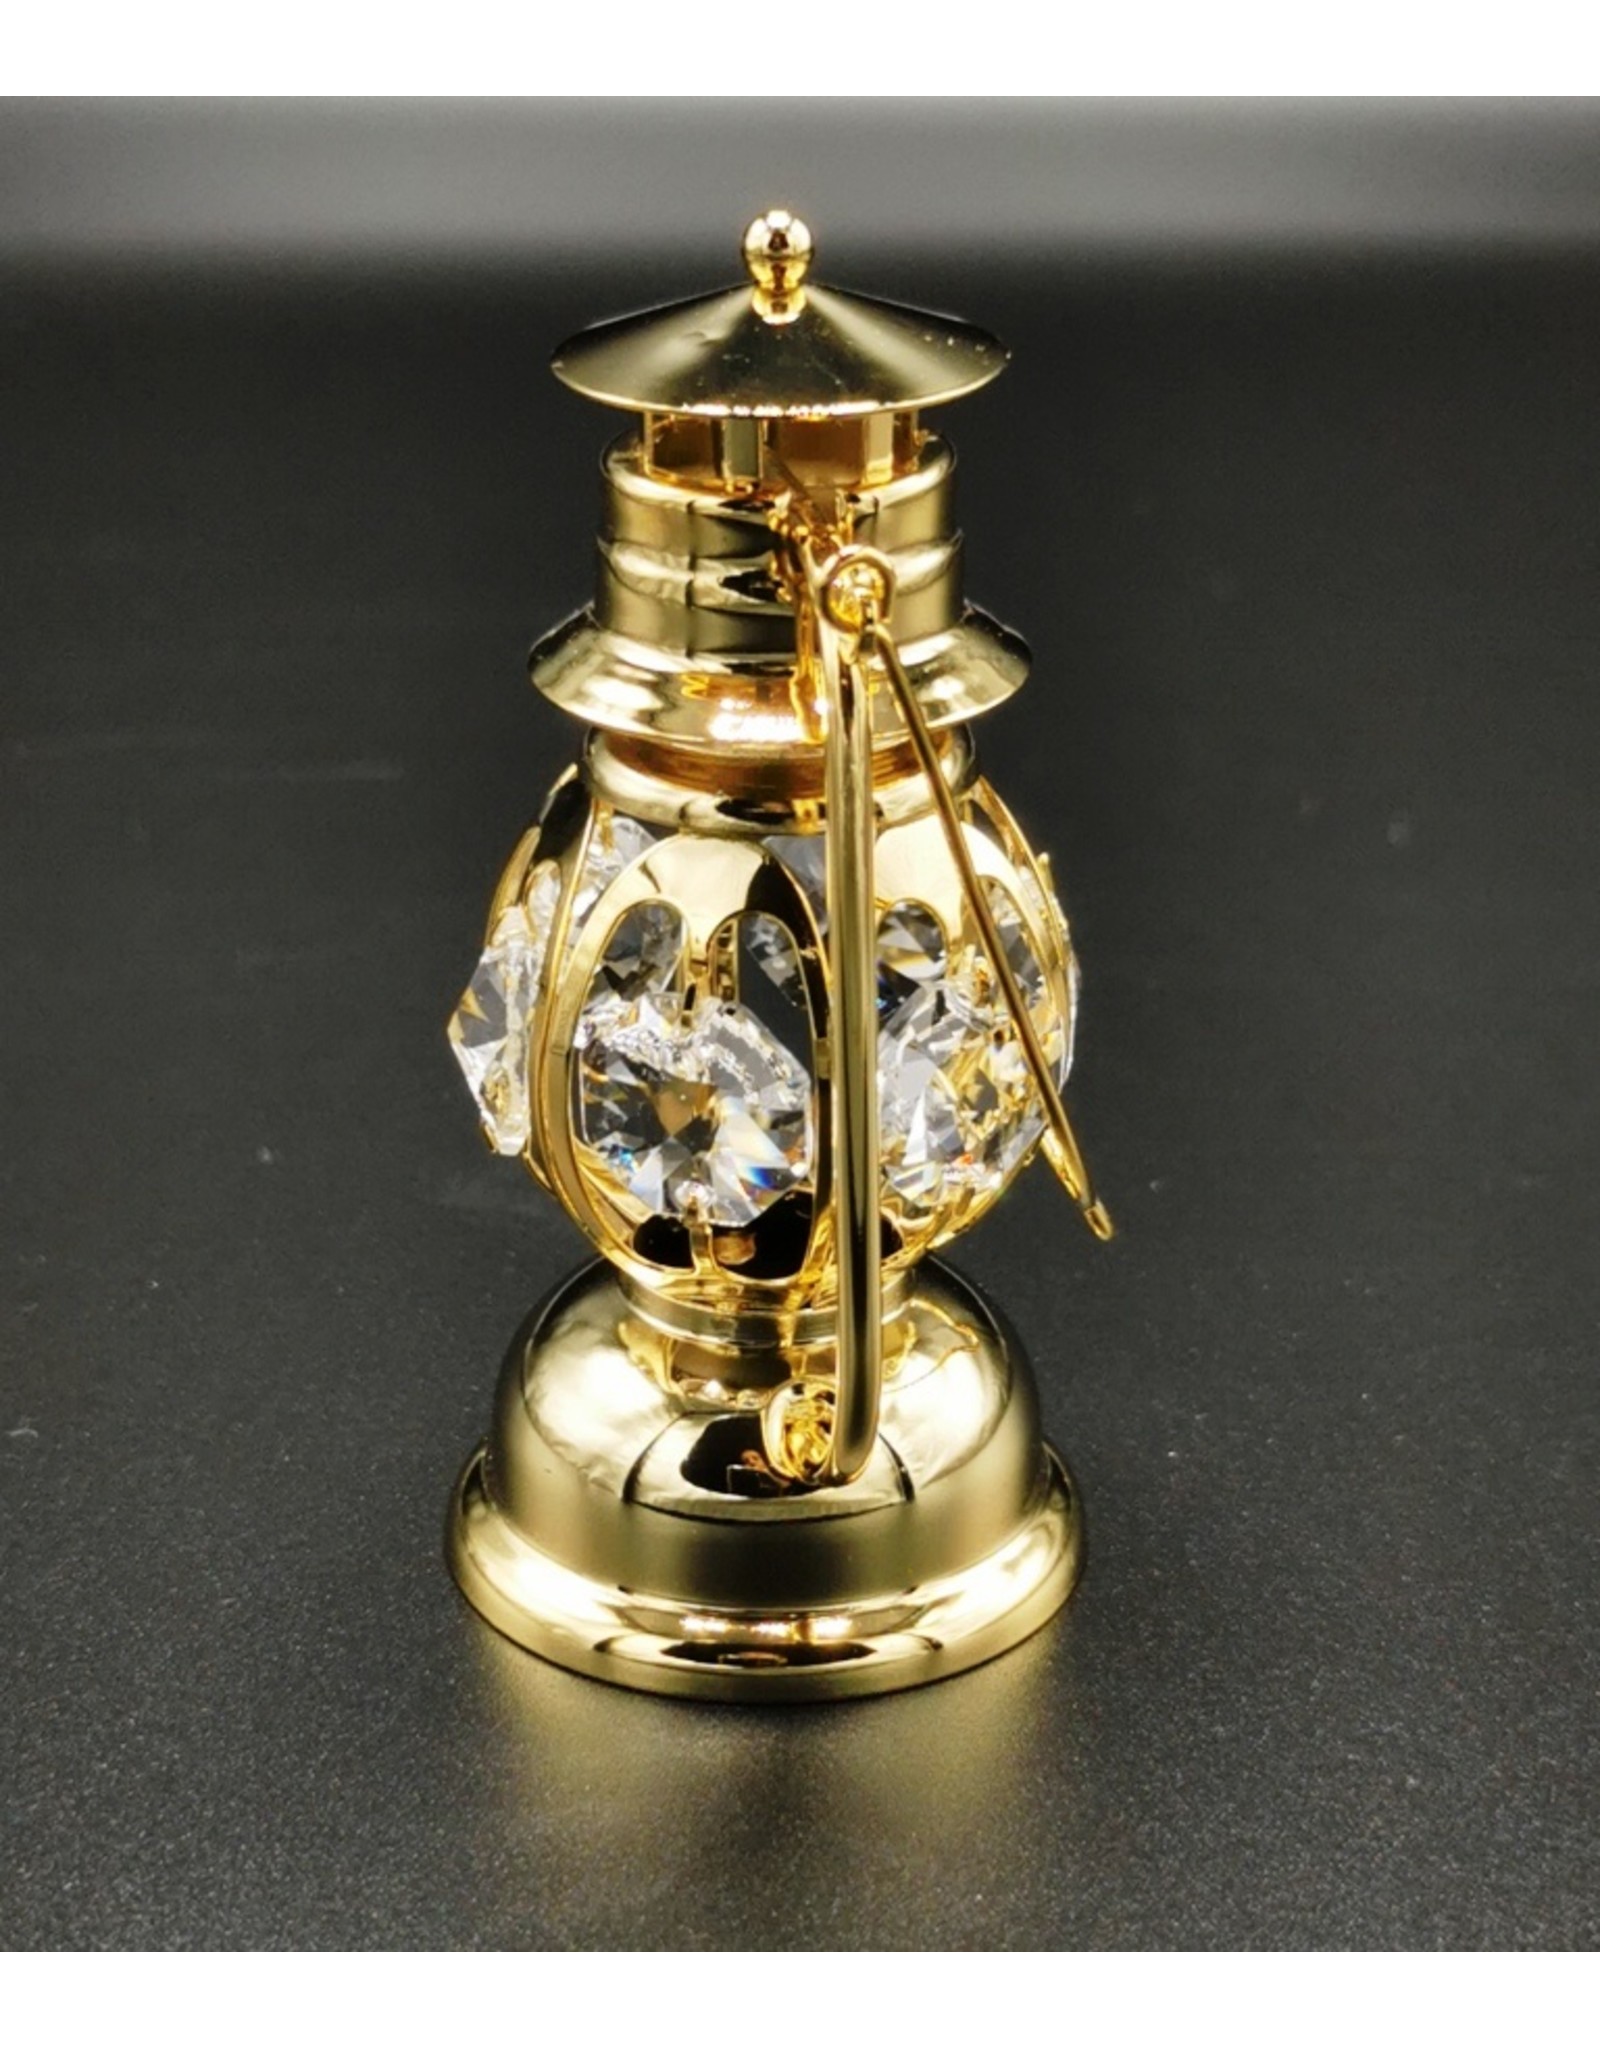 Crystal Temptations Miscellaneous - Miniature Storm Lantern - gold-plated and with Swarovski